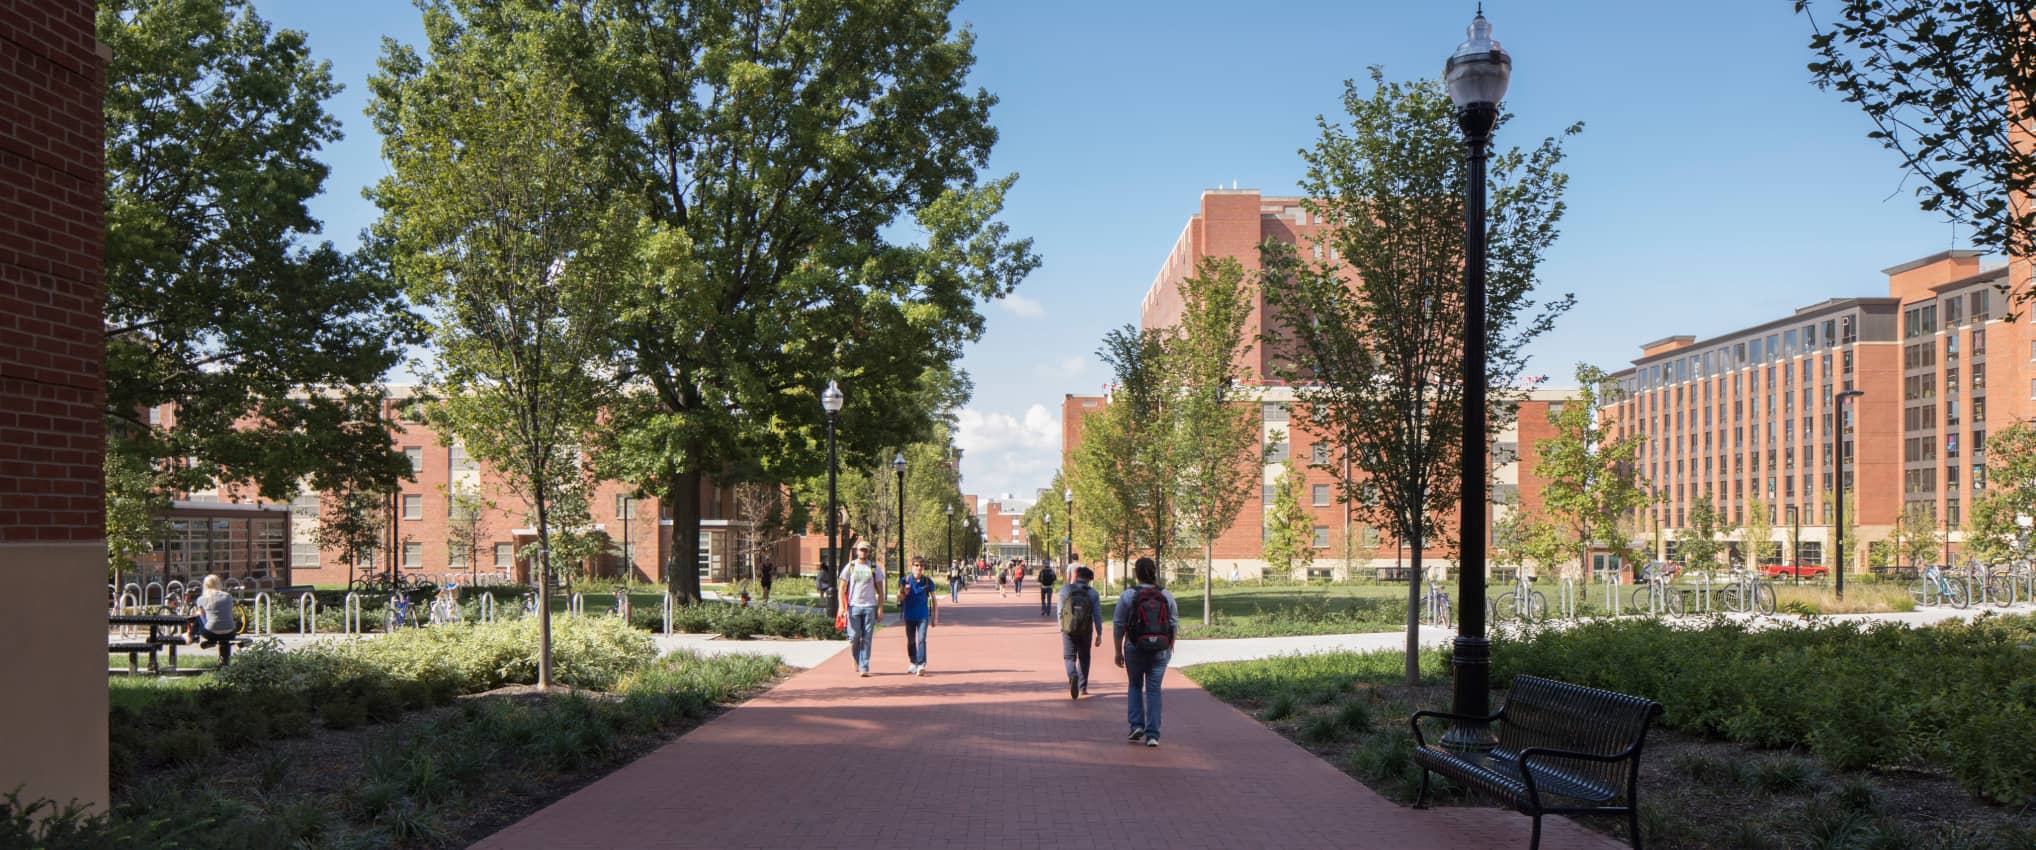 The Ohio State University North Residential District Transformation